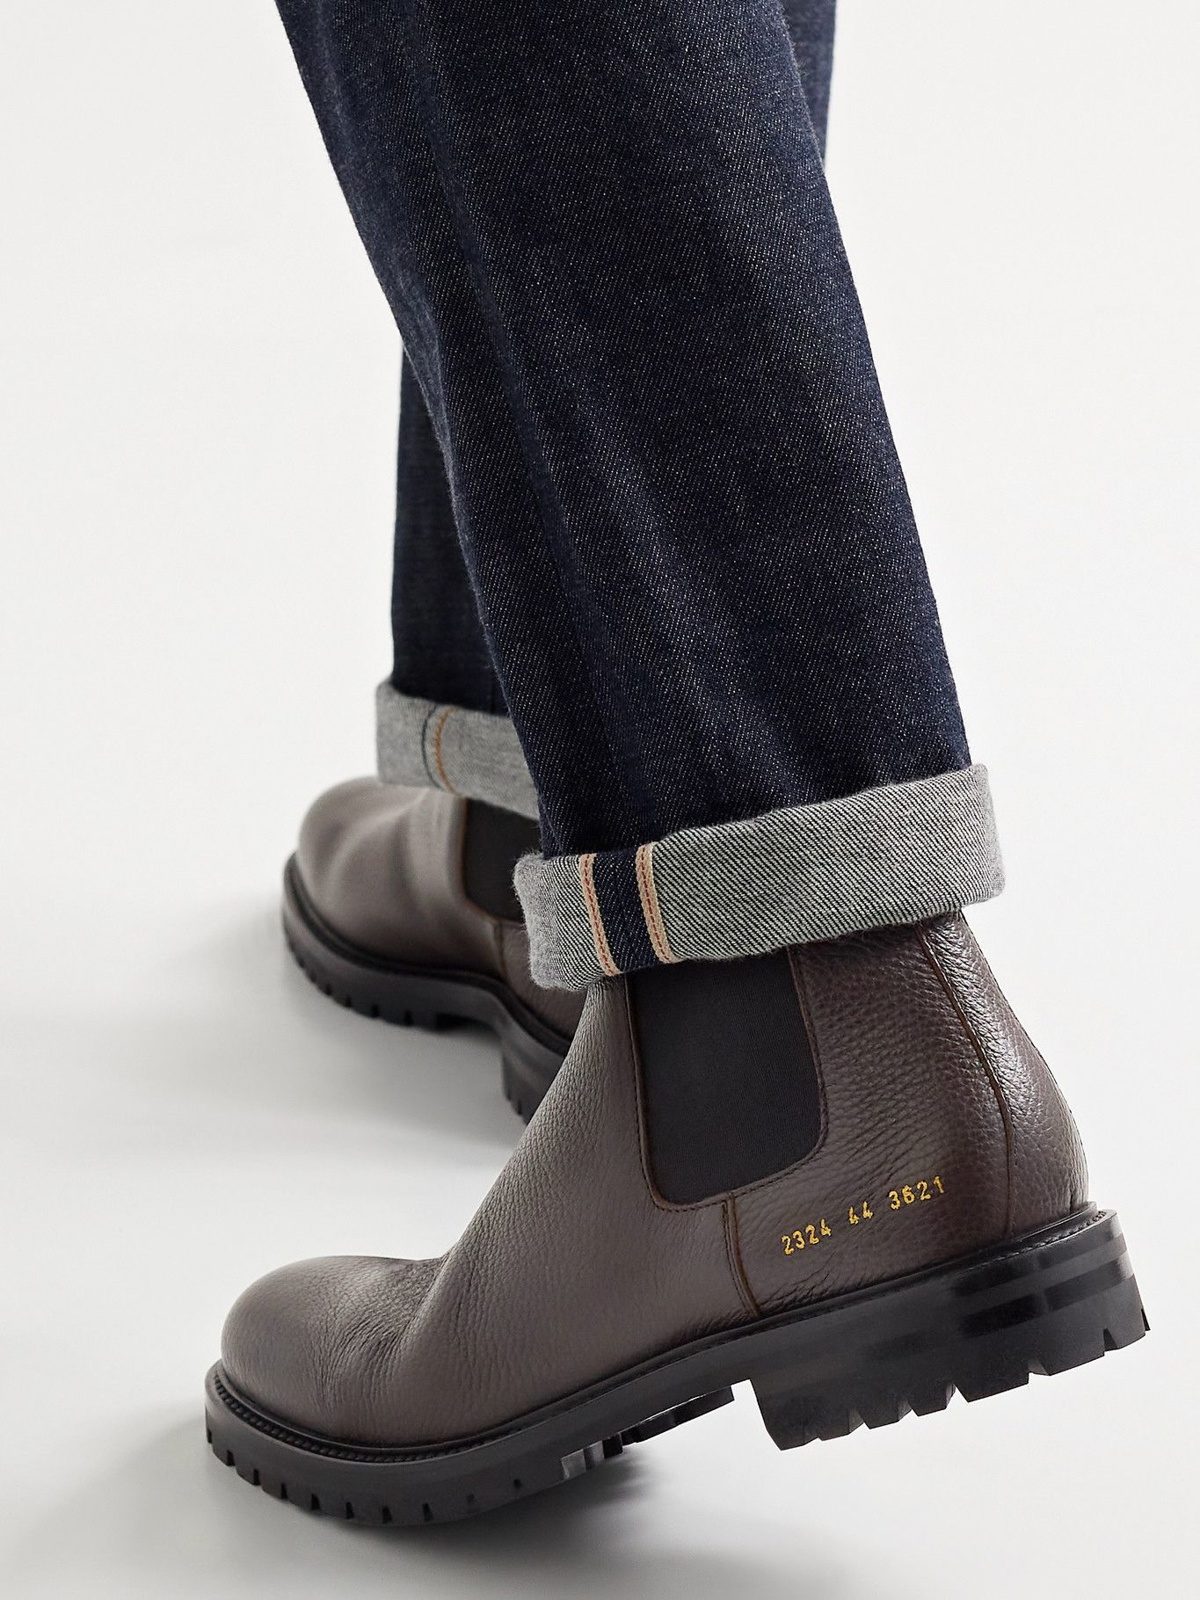 apt malt bemærkning Common Projects - Full-Grain Leather Chelsea Boots - Brown Common Projects